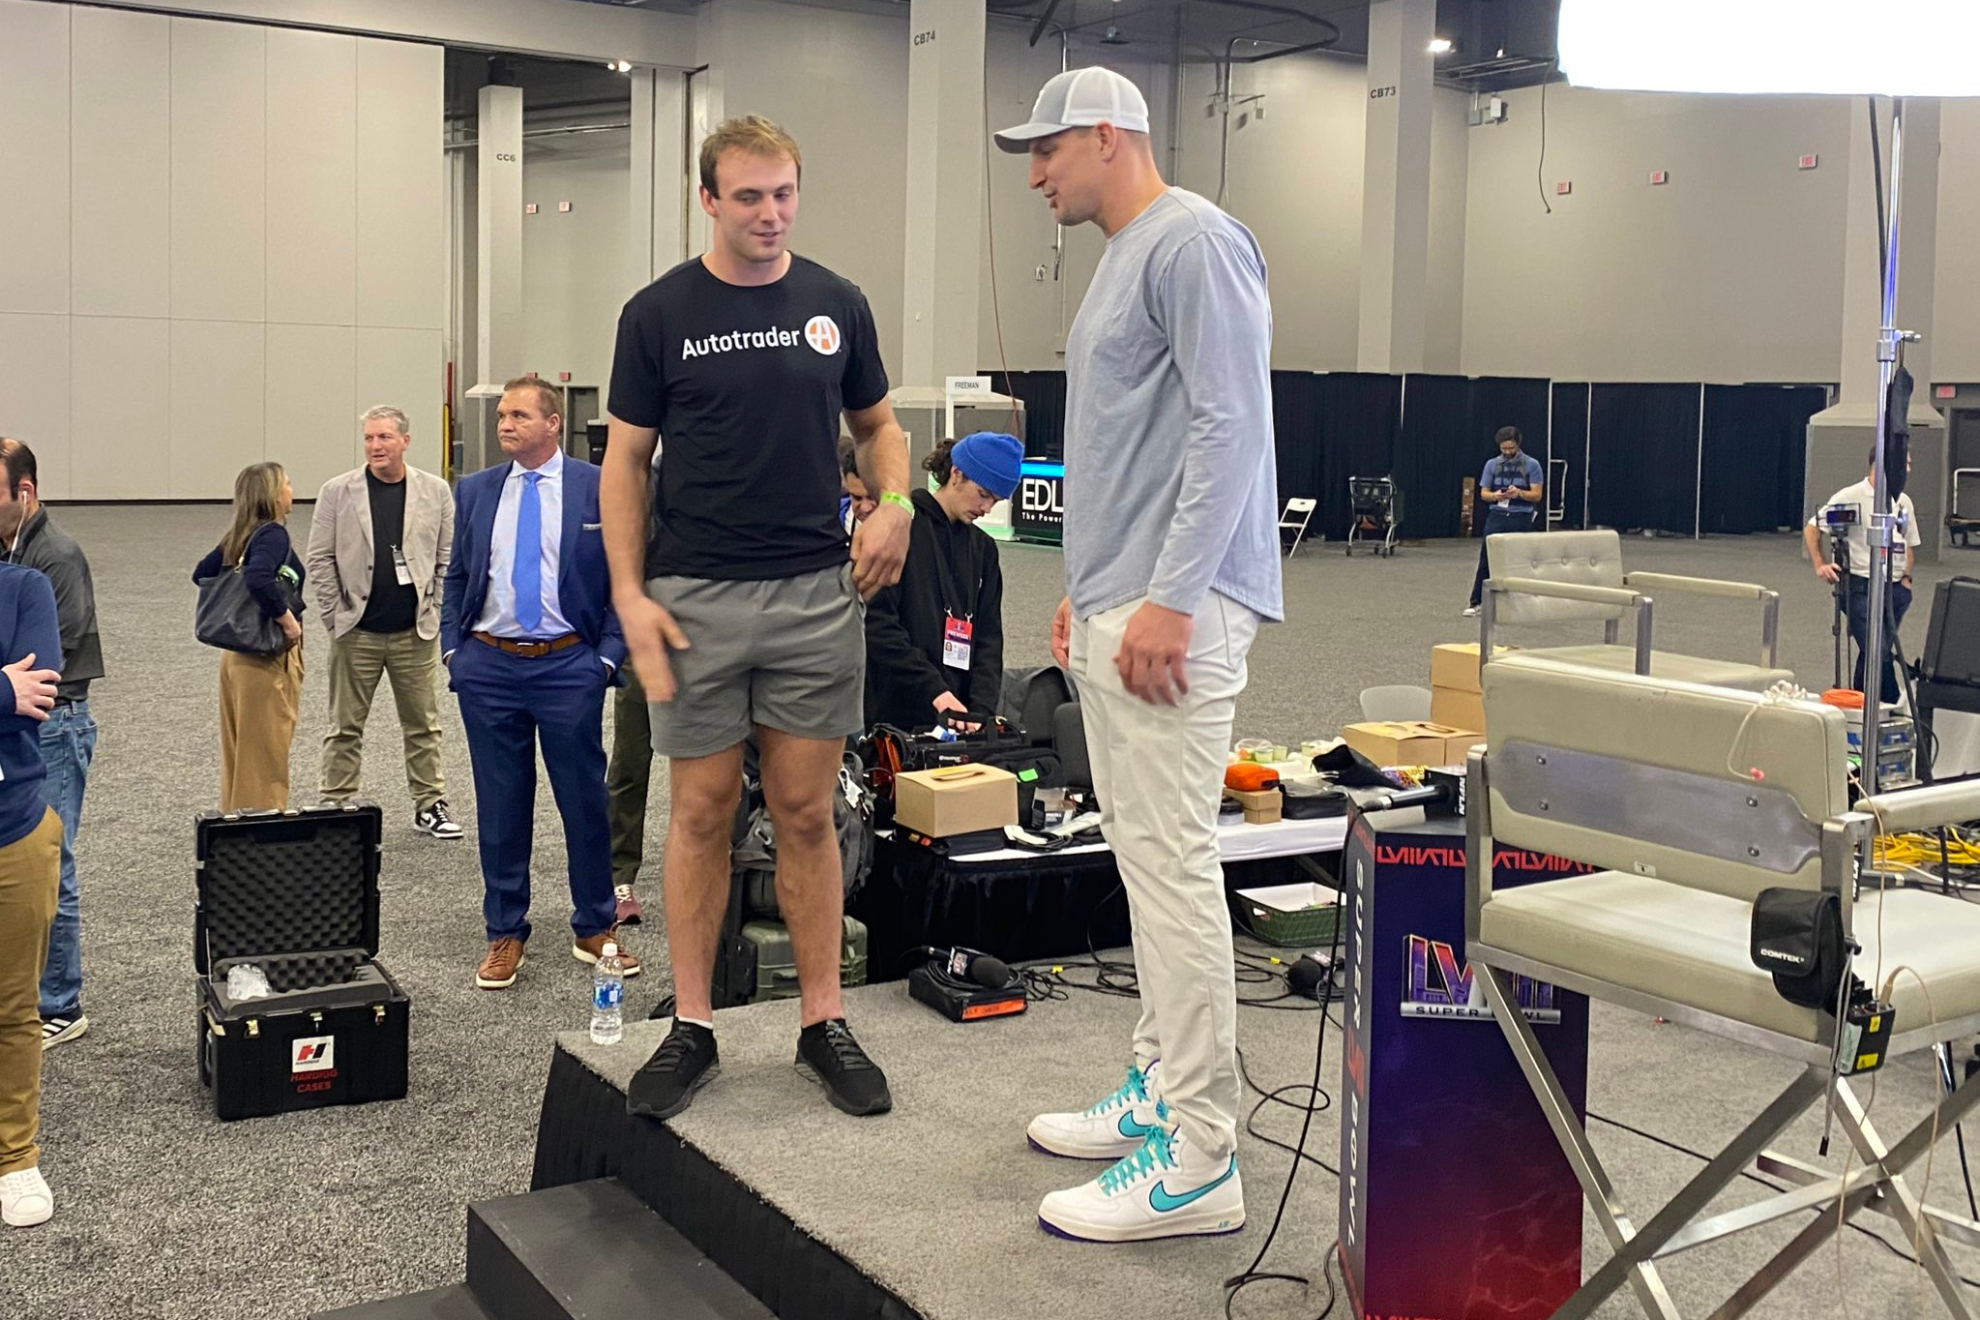 Brock Bowers (left) and Rob Gronkowski (right).